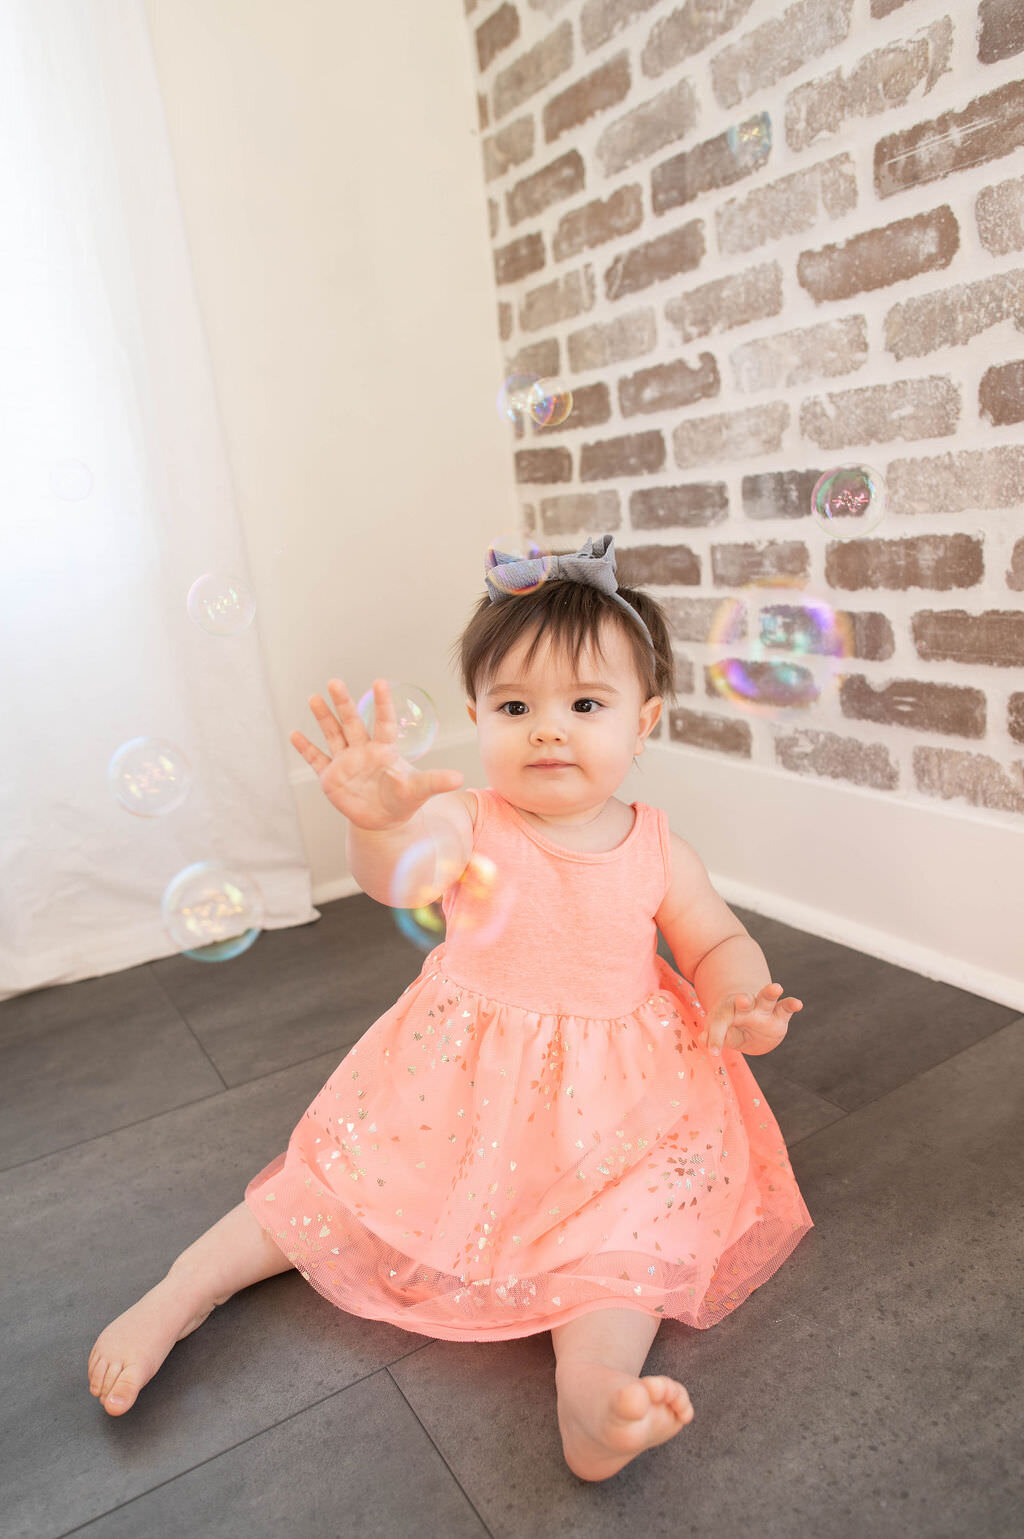 A small child sitting on the ground playing with bubbles.